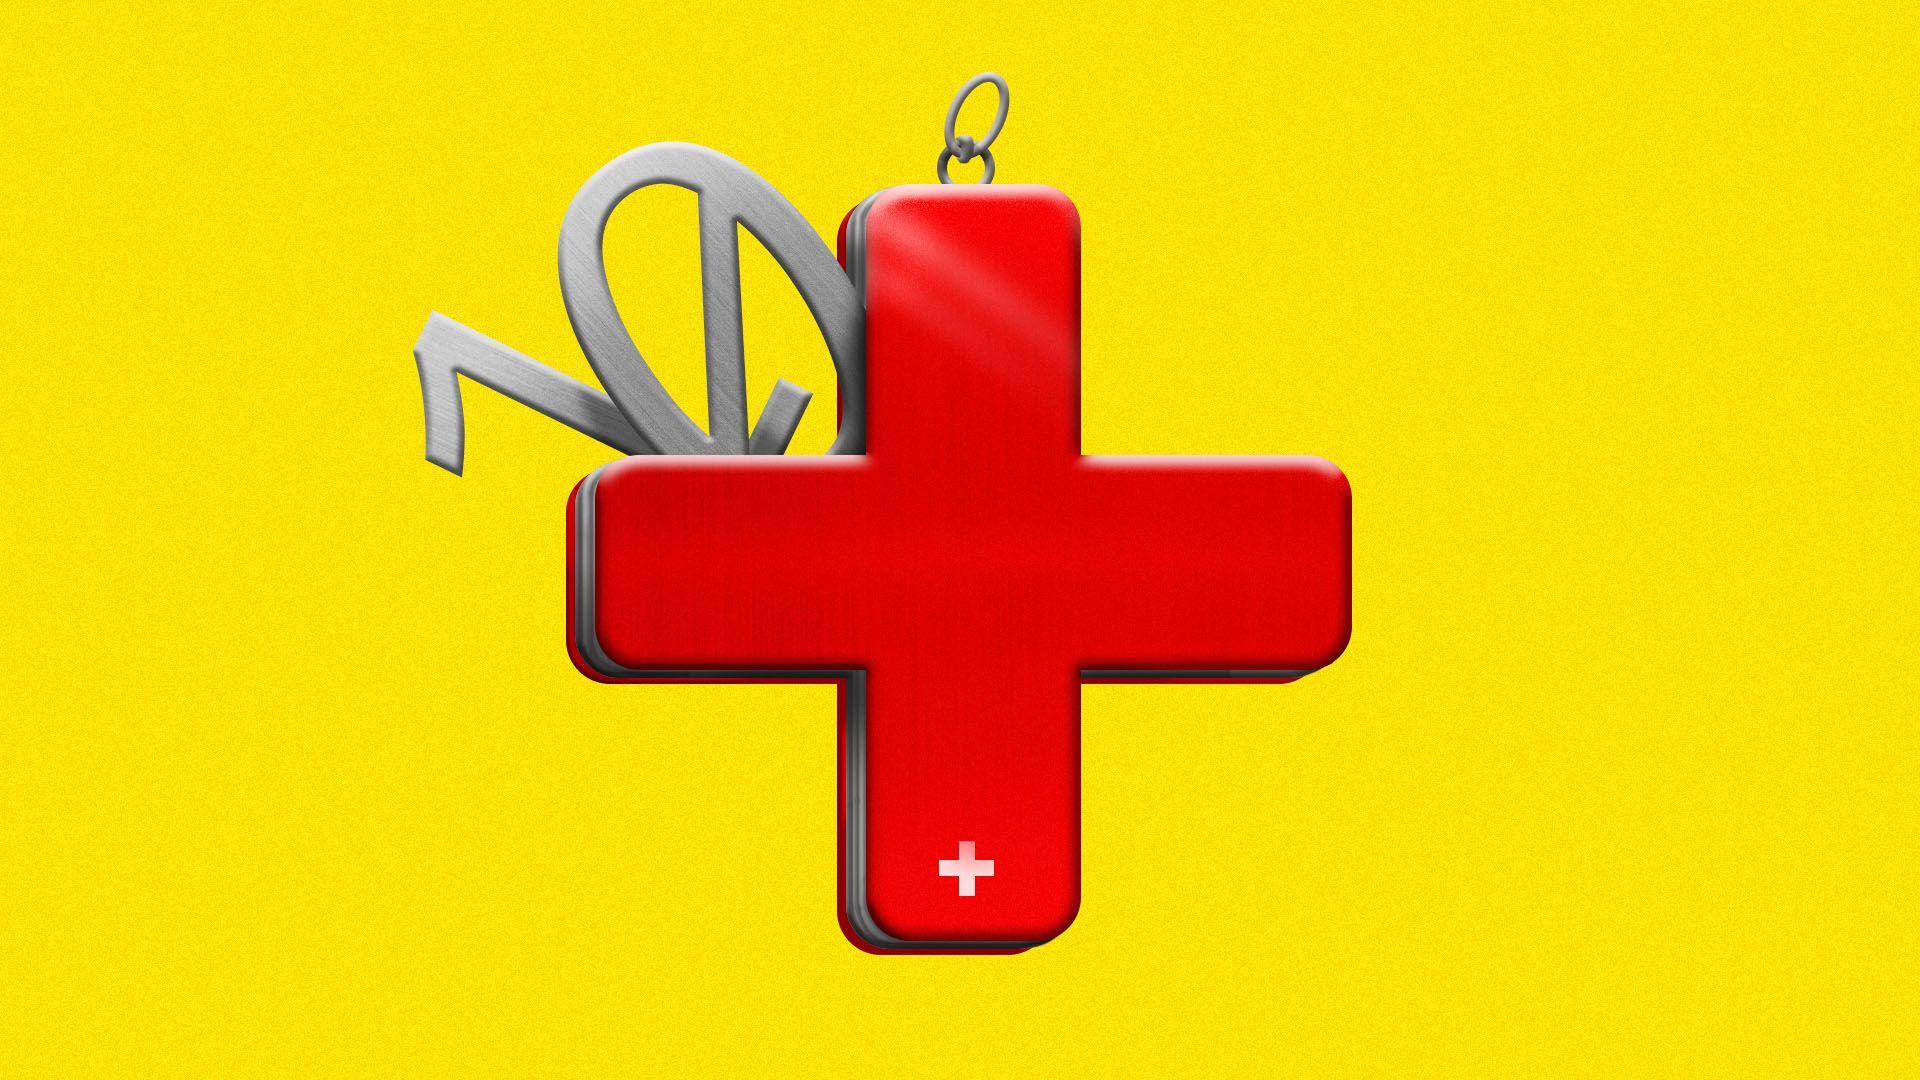 Illustration of a Swiss Army knife in the shape of a red cross with a metal one and zero